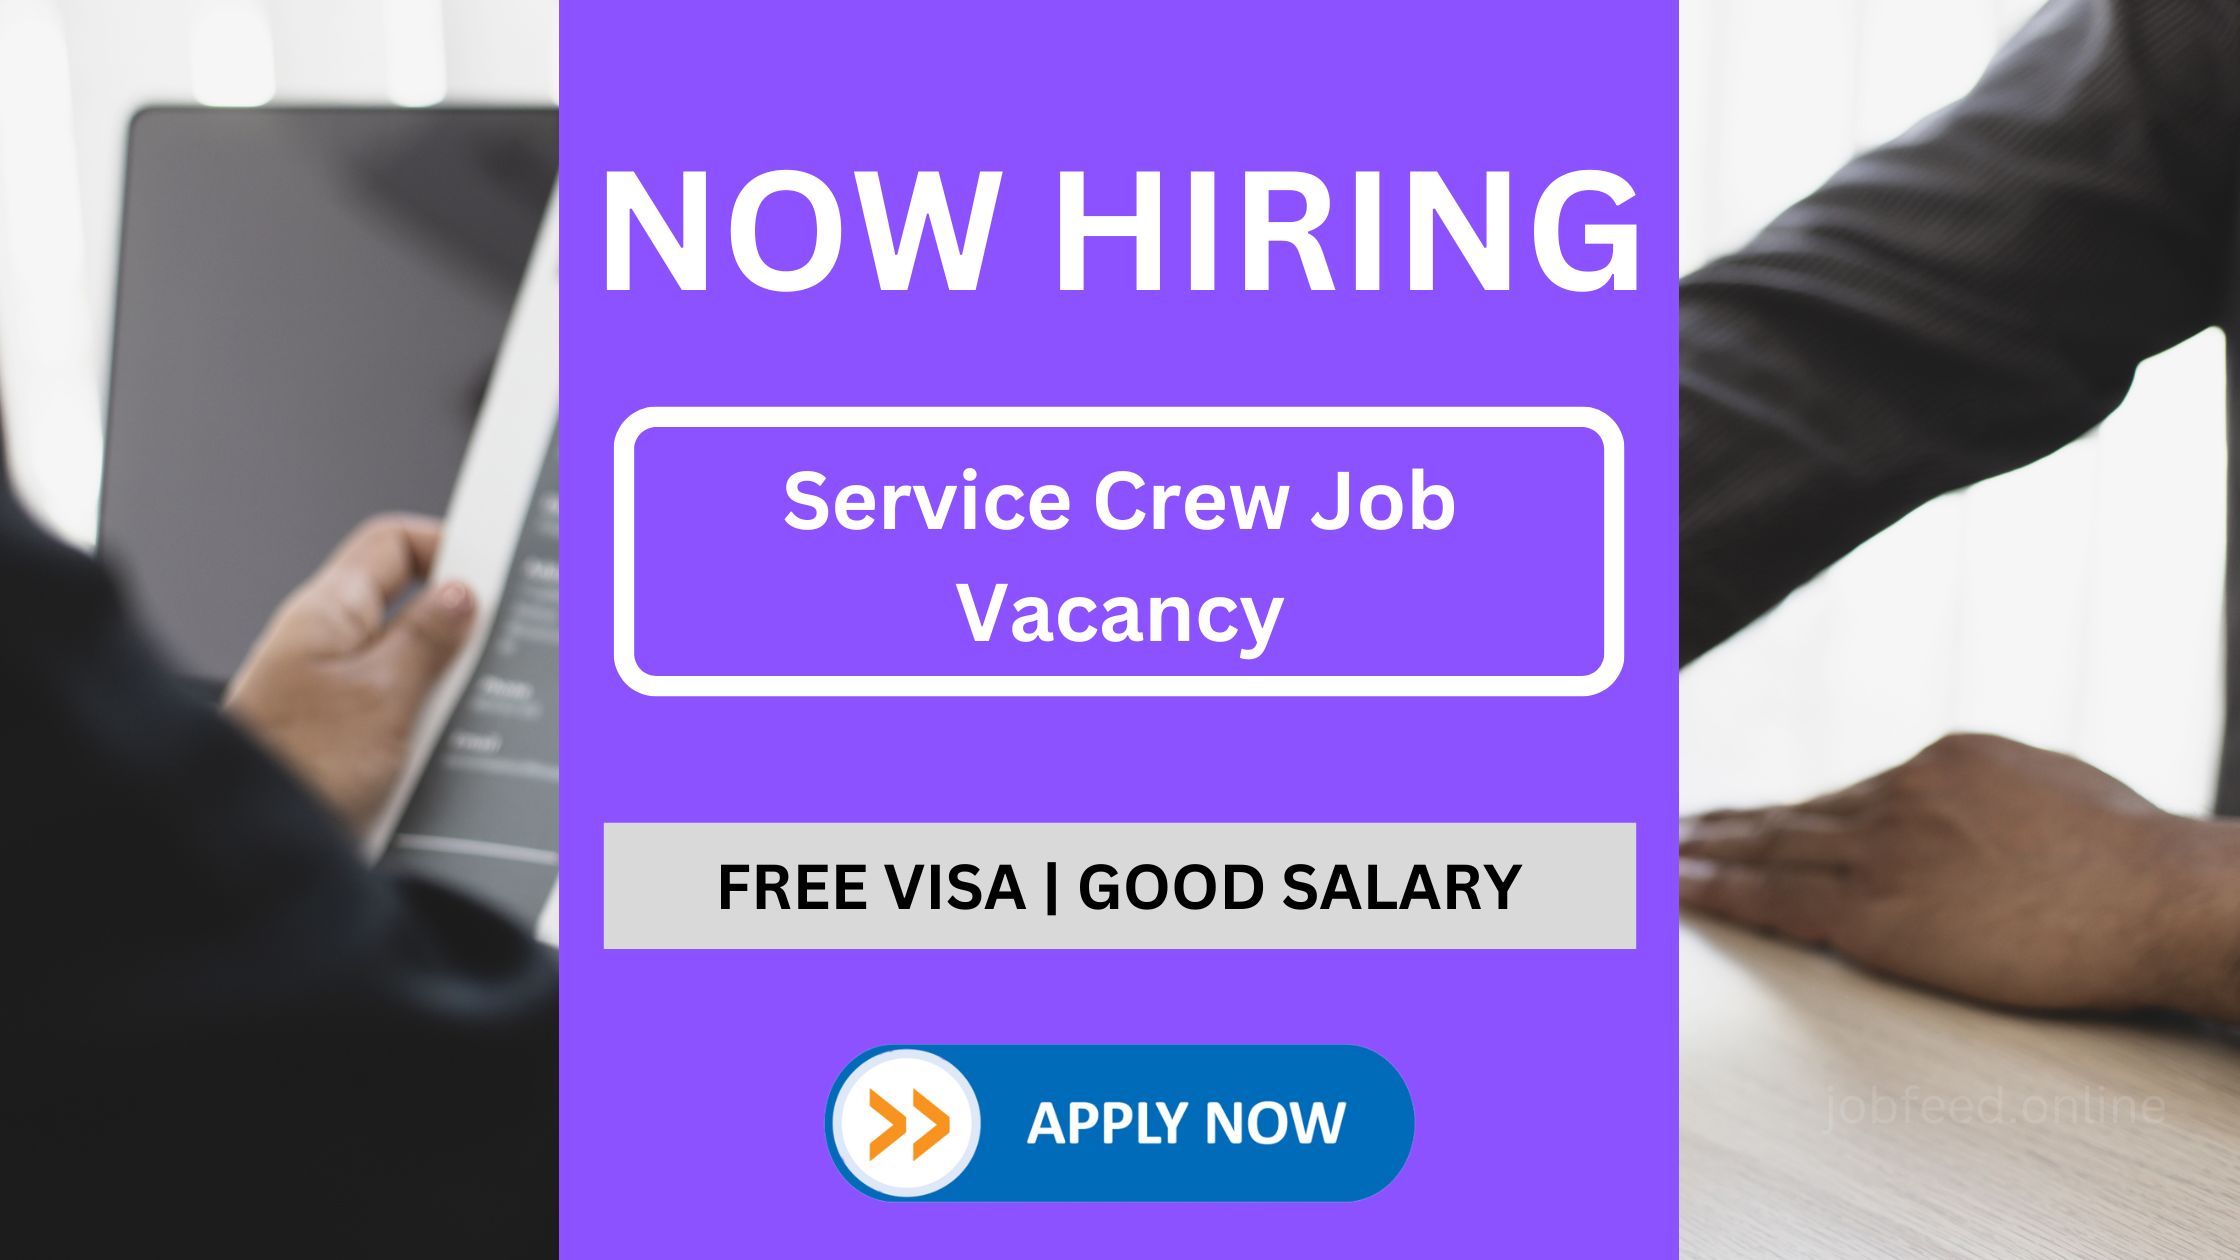 Service Crew Job Vacancy - At Least 2 Years Experience Required